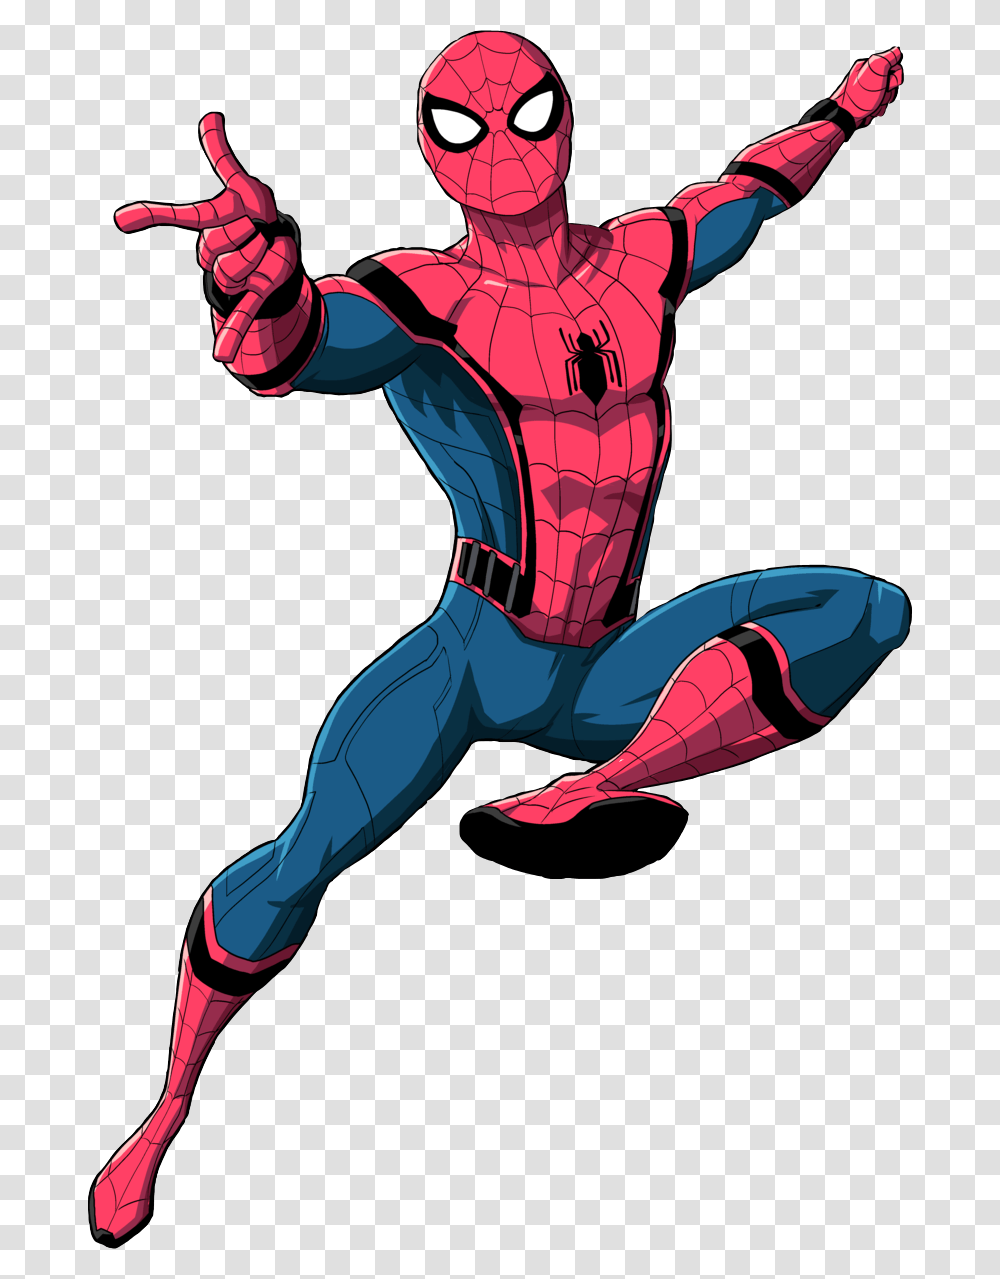 Spiderman Avengers Marvel Spidermanhomecoming Freetoedit Luciano Vecchio Spiderman, Person, Book, Comics, Outdoors Transparent Png